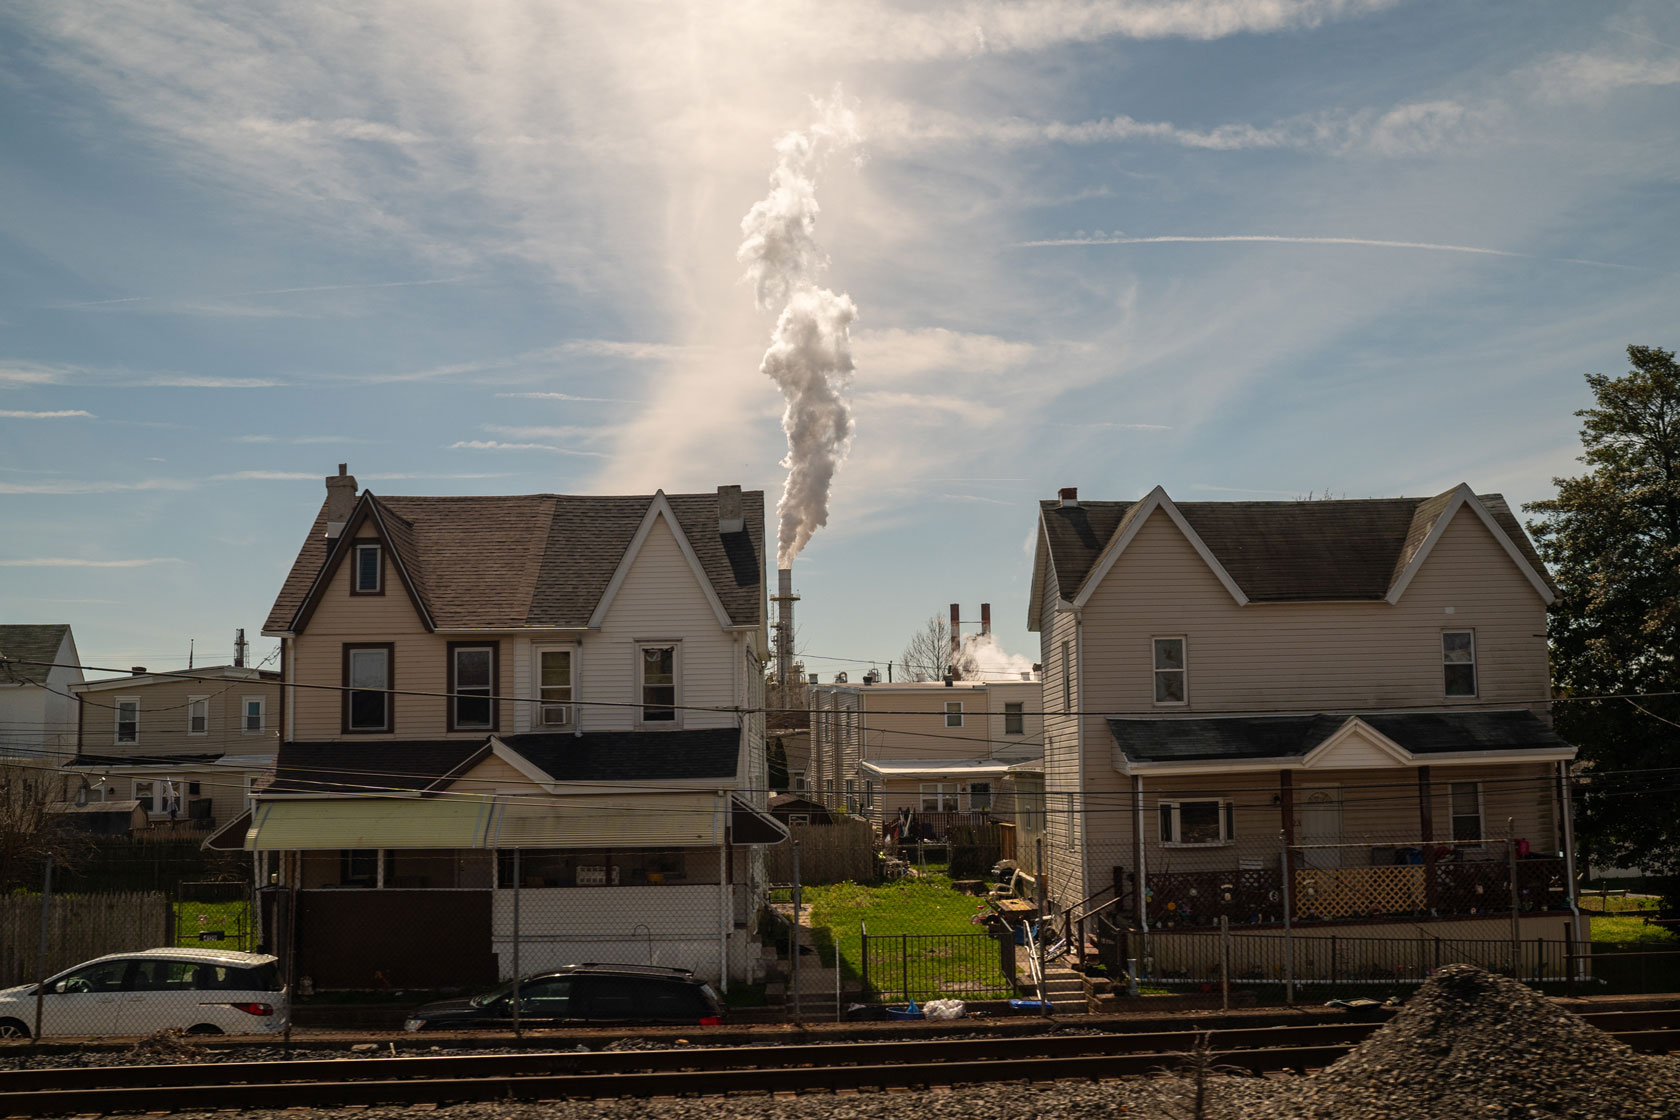 Photo shows two houses next to a train track, and a smoke stack in the background emitting a large plume of smoke.